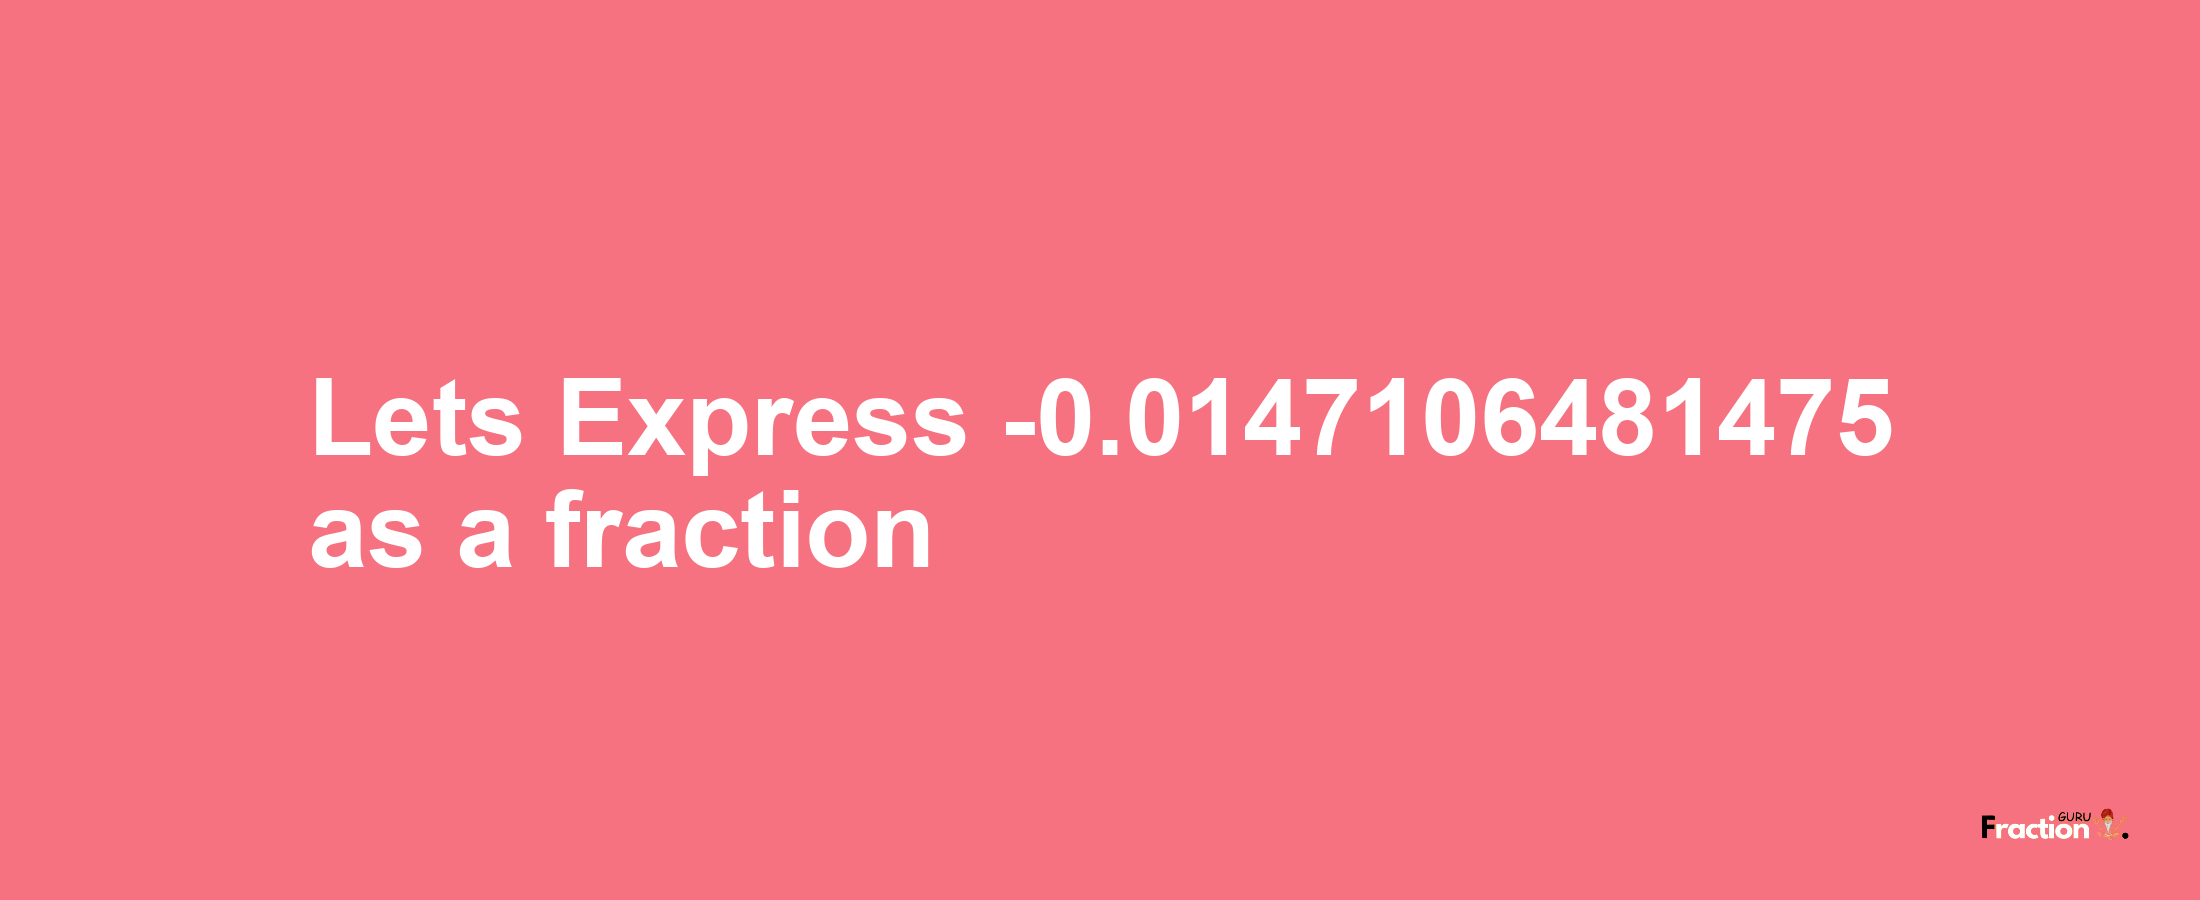 Lets Express -0.0147106481475 as afraction